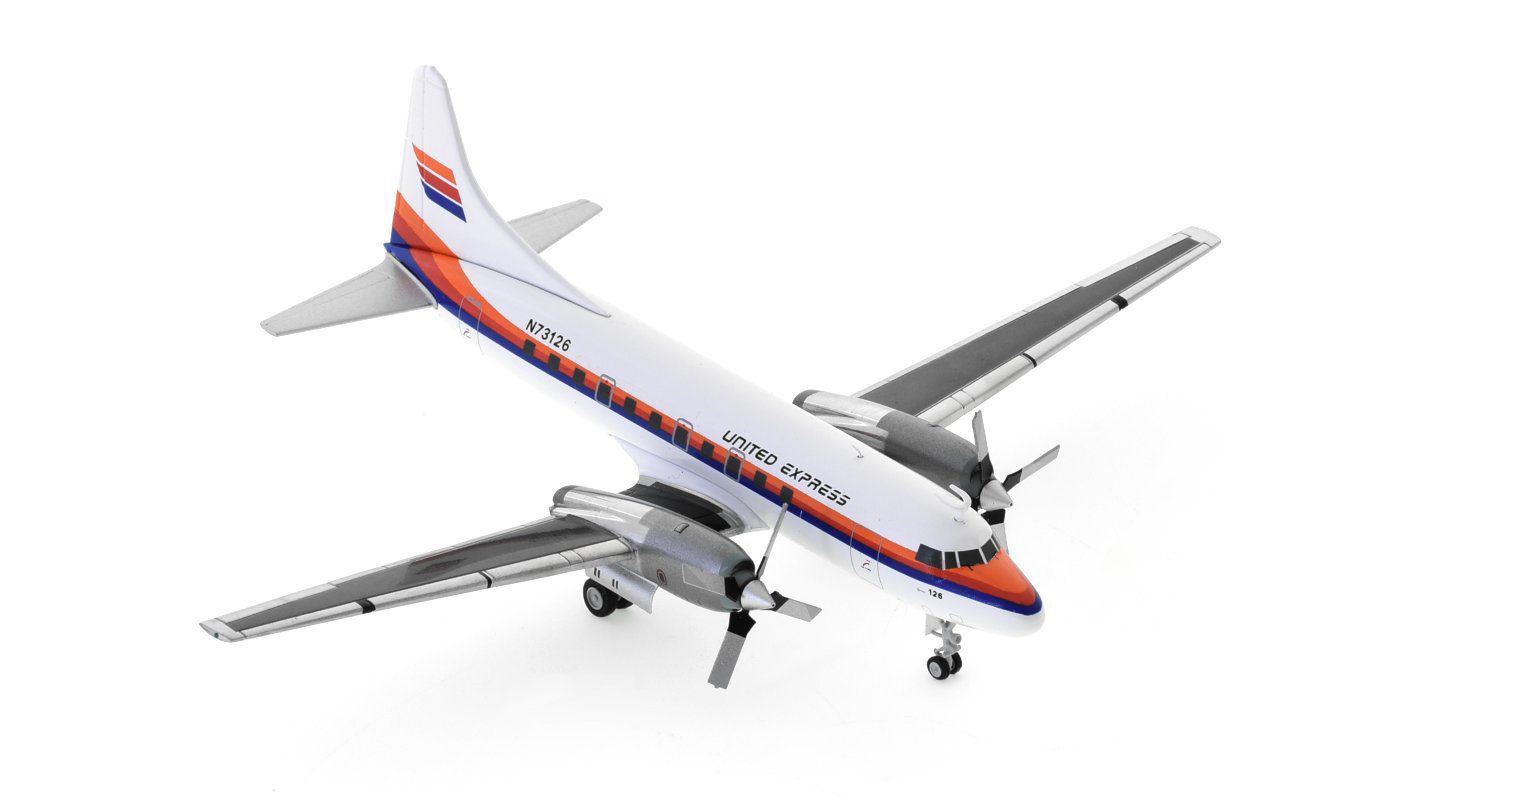 Front starboard side view of Gemini Jets G2UAL318 - 1/200 scale diecast model of the Convair CV-580, registration N73126 operated by Aspen Airways in the livery of United Express